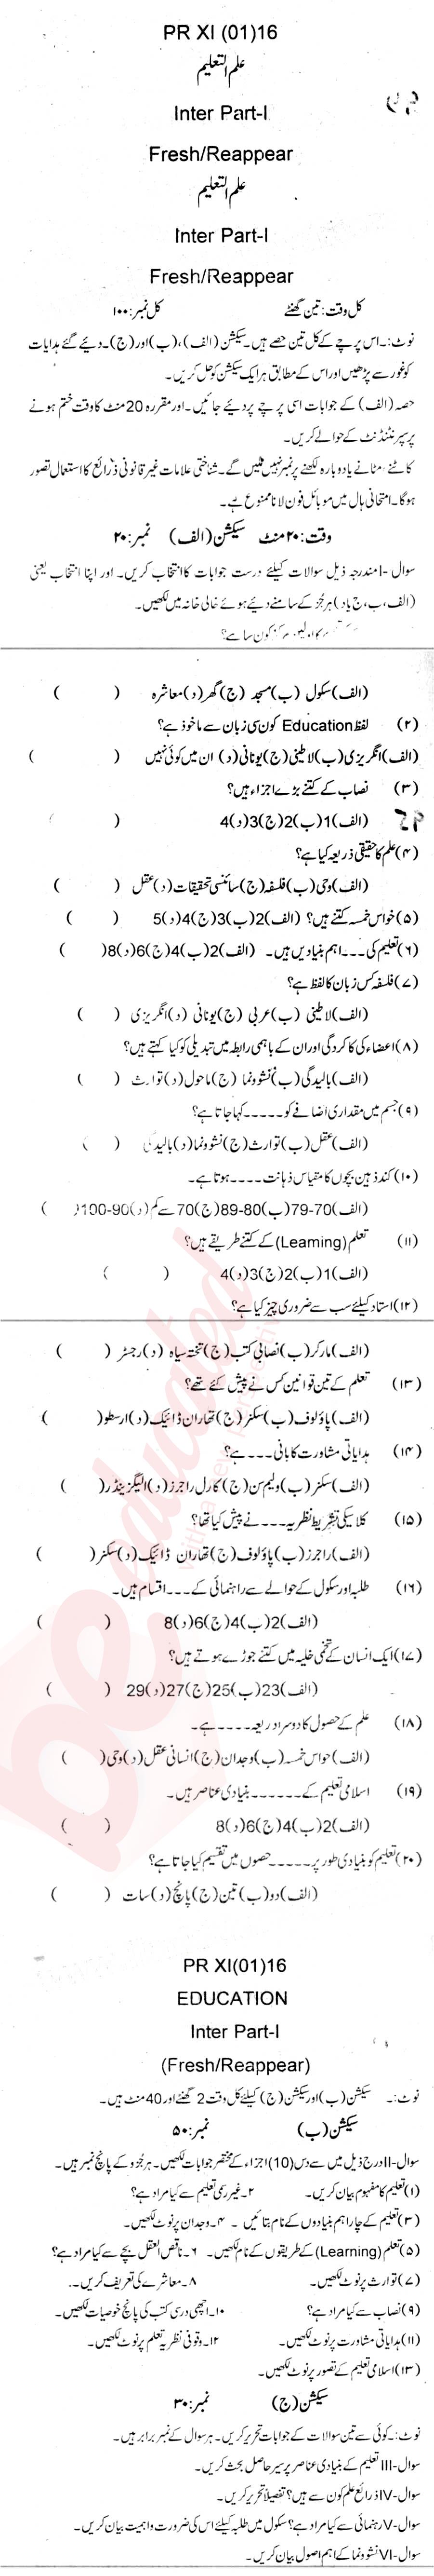 Education FA Part 1 Past Paper Group 1 BISE Abbottabad 2016